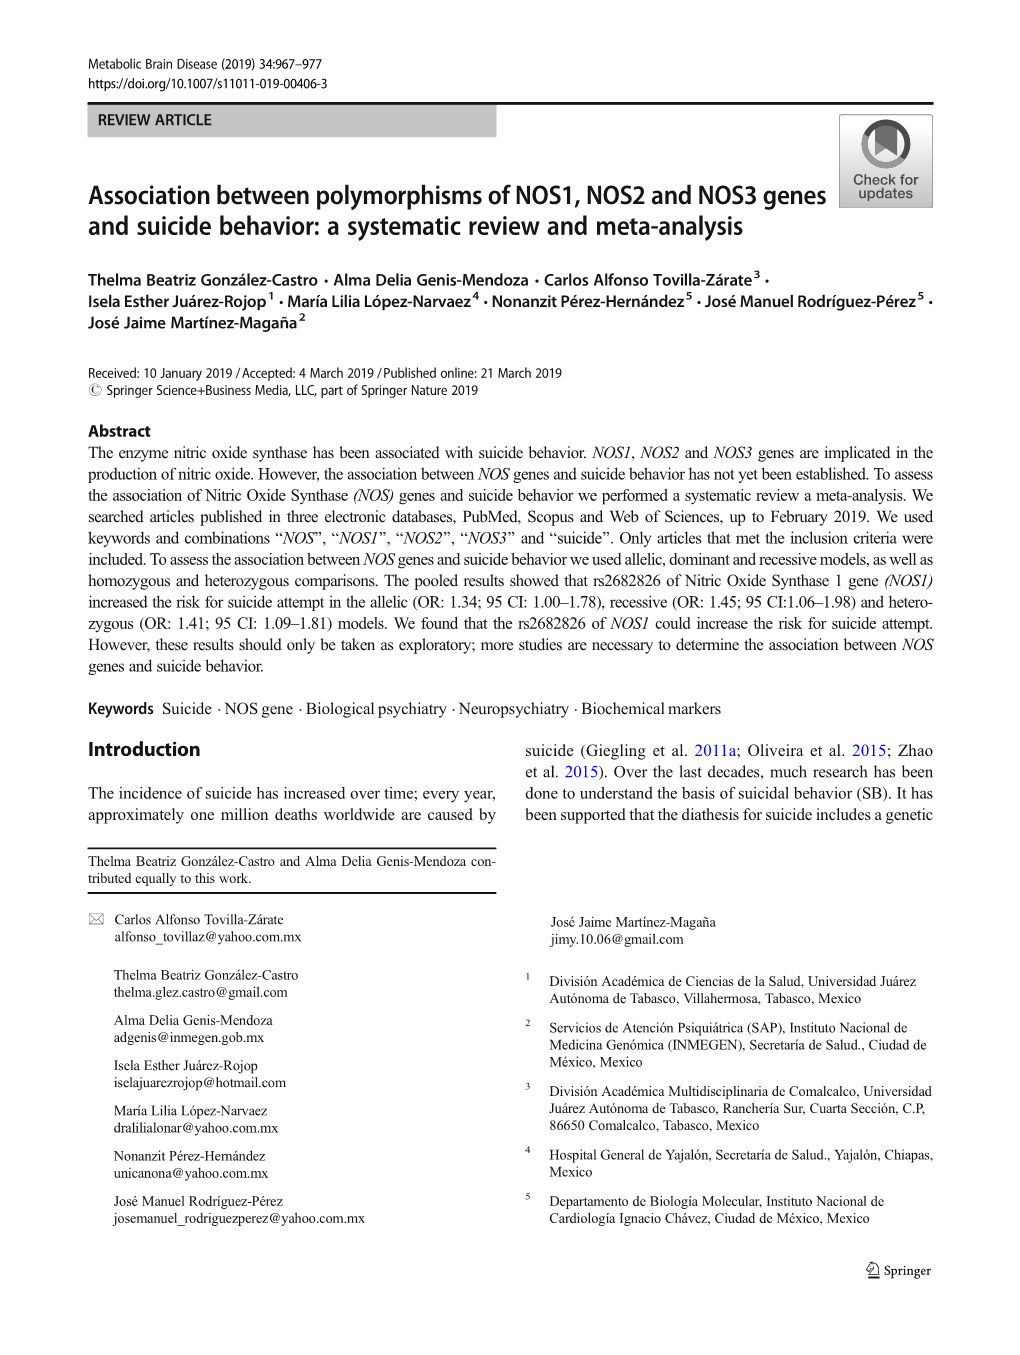 Association Between Polymorphisms of NOS1, NOS2 and NOS3 Genes and Suicide Behavior: a Systematic Review and Meta-Analysis